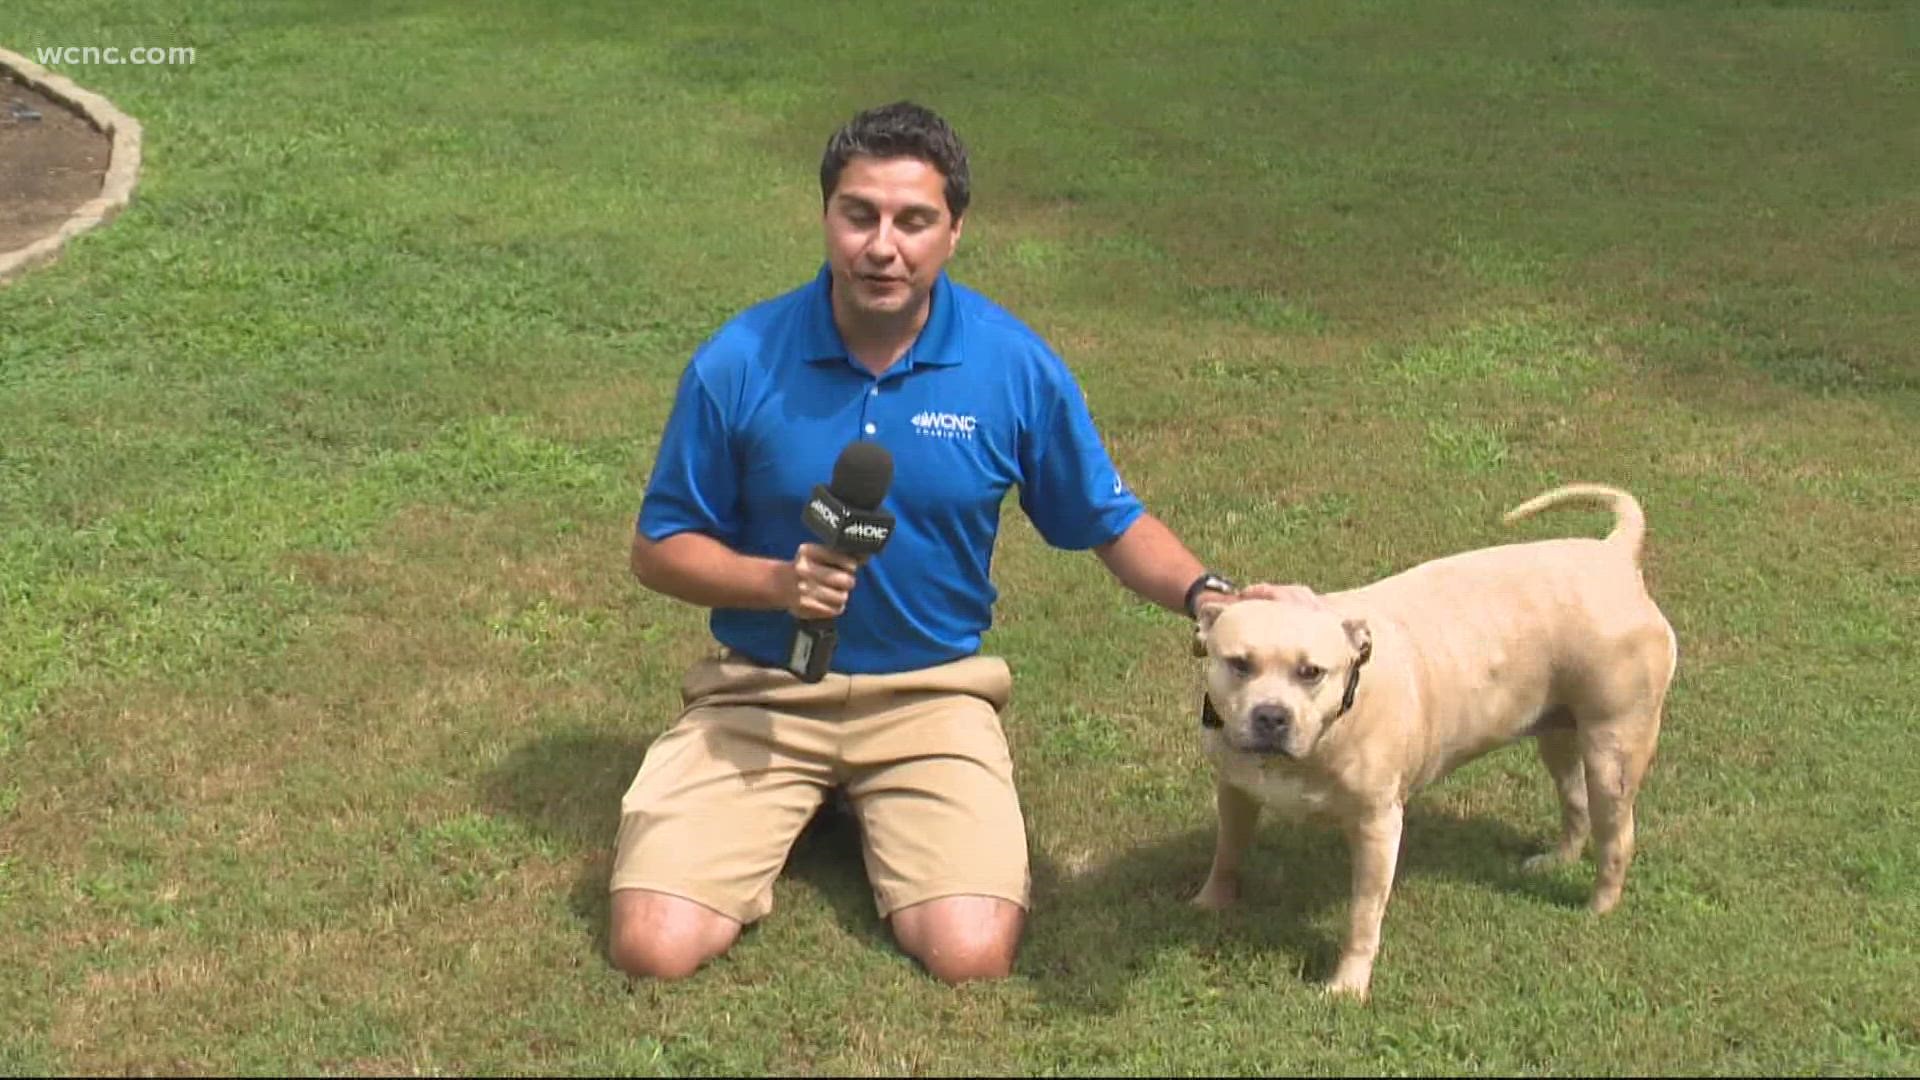 WCNC Charlotte's Chris Mulcahy's shares his Clear the Shelters dog adoption story.